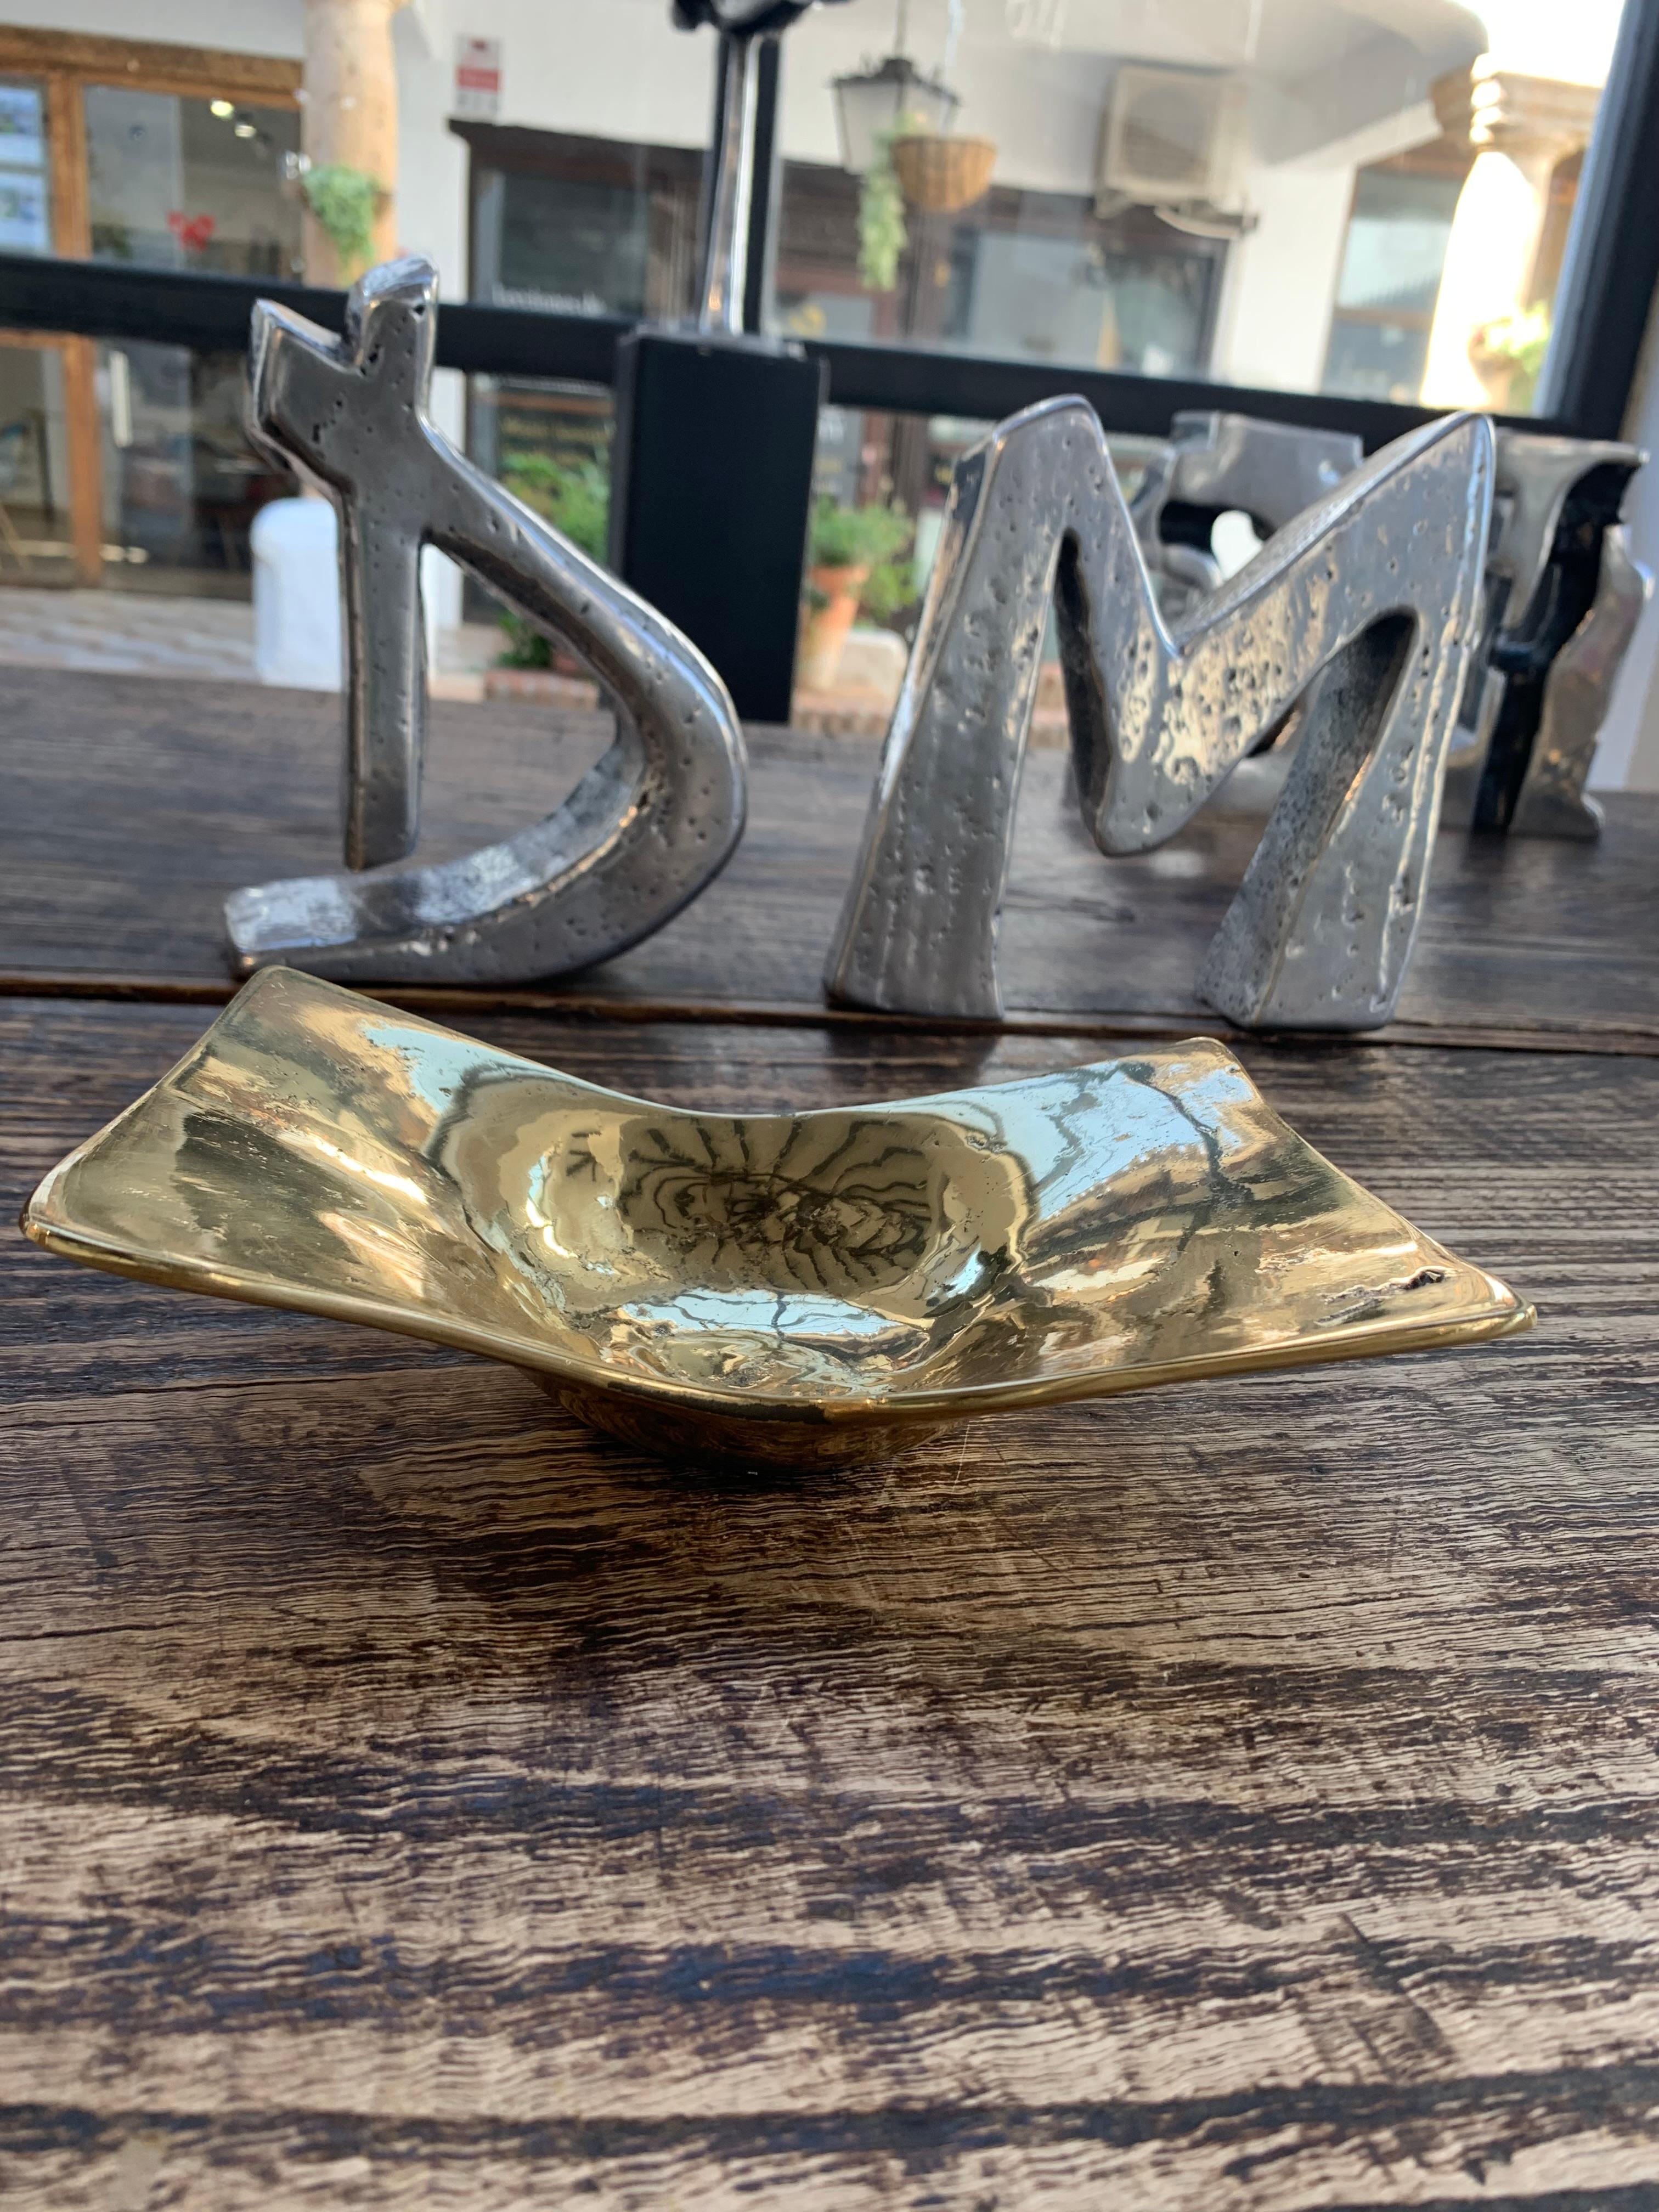 The decorative tray  was created by David Marshall, it is made of  sand cast brass.
Handmade, mounted and finished in our foundry and workshop in Spain from recycled materials.
Certified authentic by the Artist David Marshall with his signature.
The